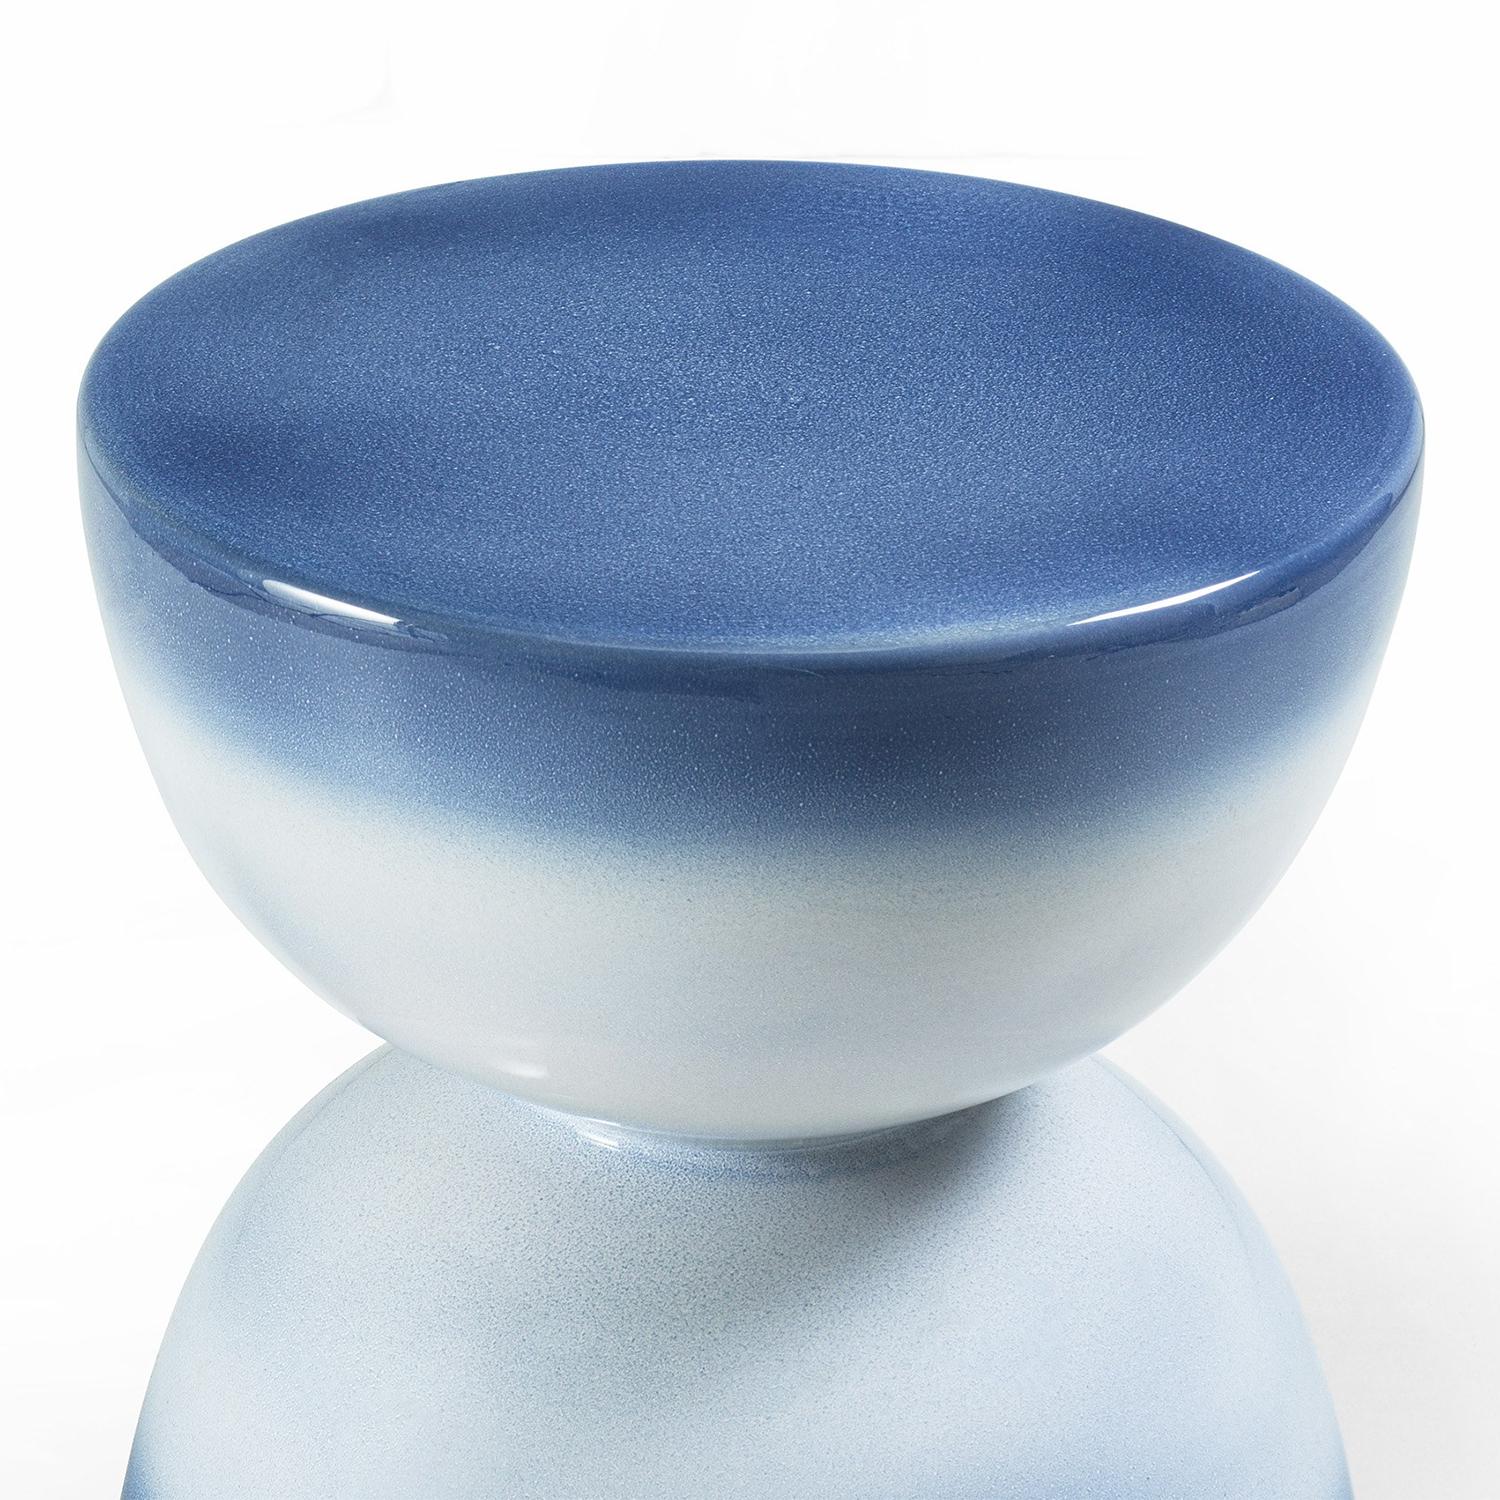 Stool Spheres Shaded Blue all in 
enameled ceramic in blue finish.